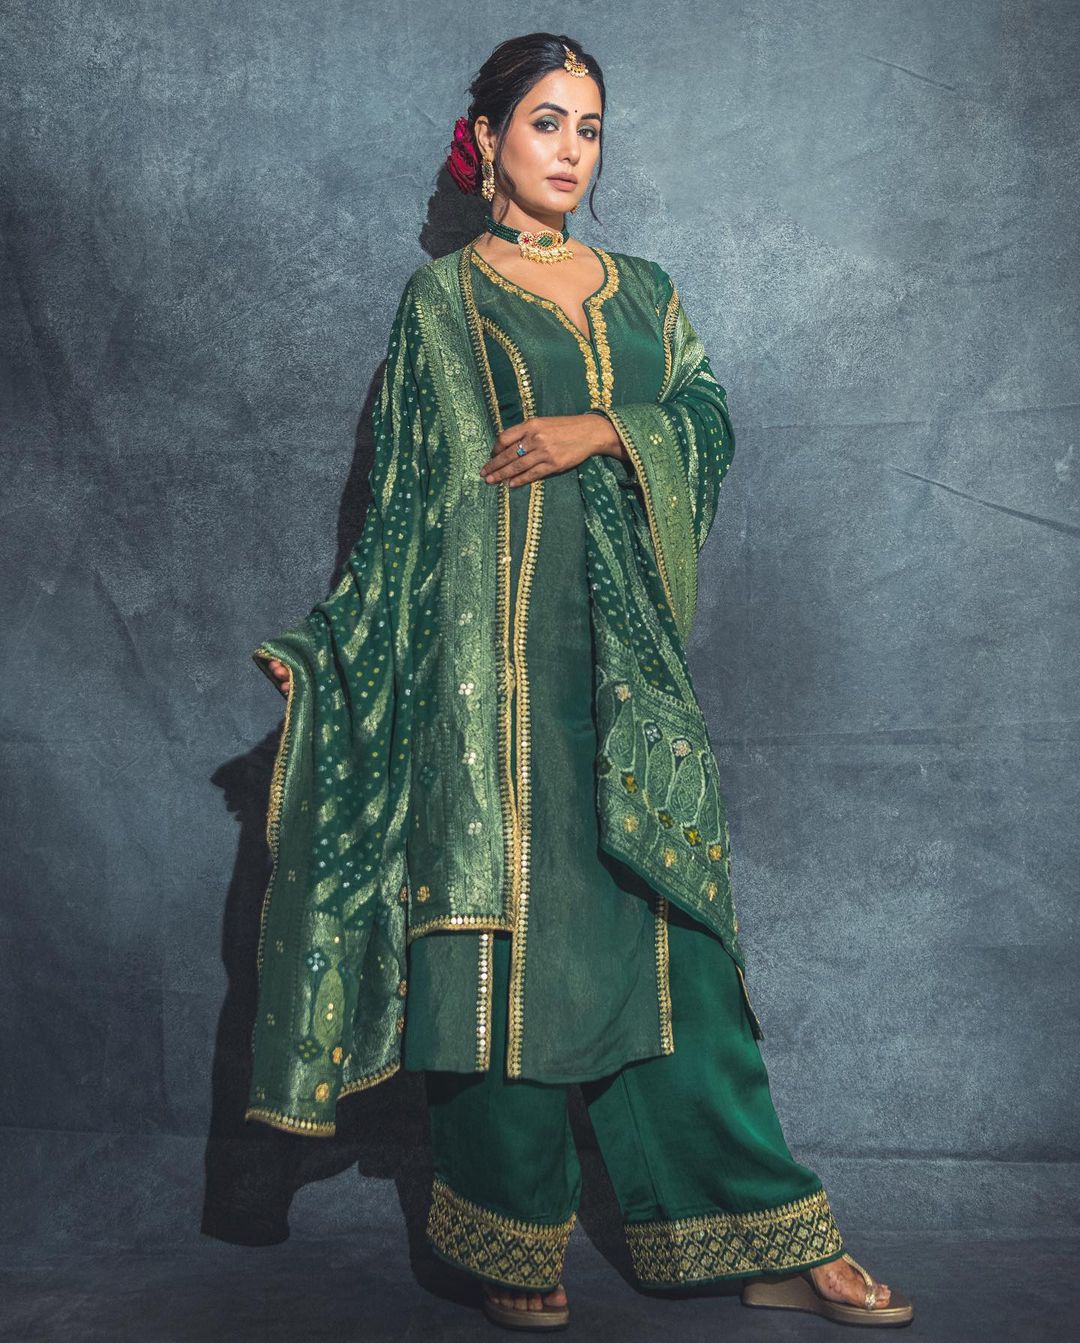 Hina Khan looks regal in the green ethnic suit